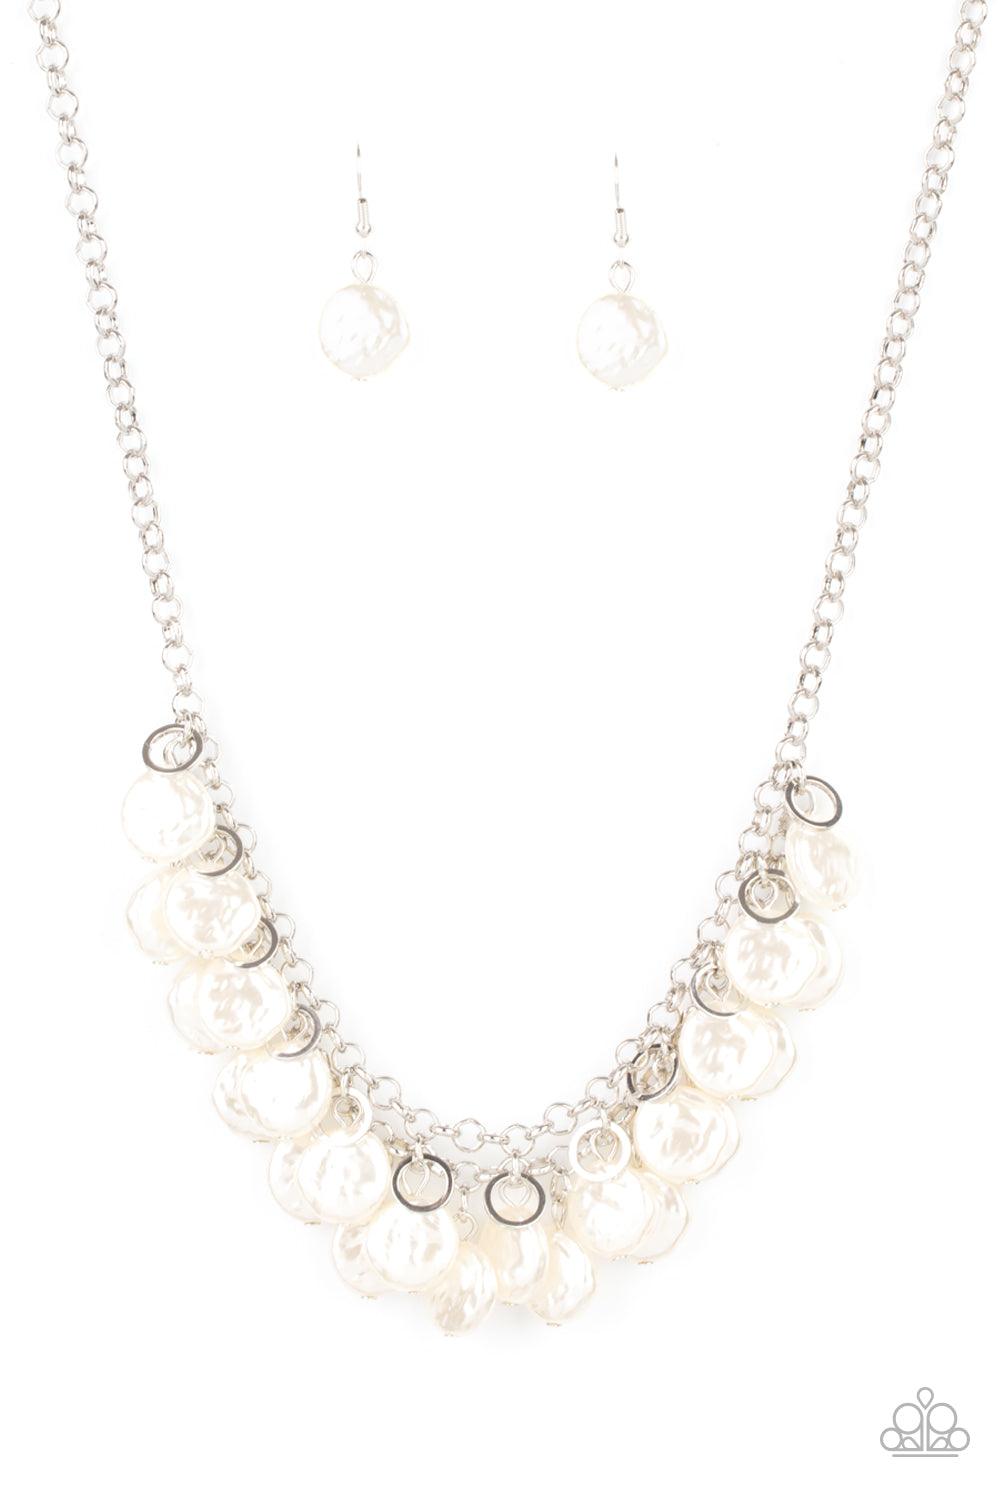 Paparazzi Accessories BEACHFRONT and Center - White Featuring delicately hammered surfaces, rows of pearly white beads cascade from the bottoms of interlocking silver chains. Dainty silver rings swing from the top of the timelessly tiered display, creatin